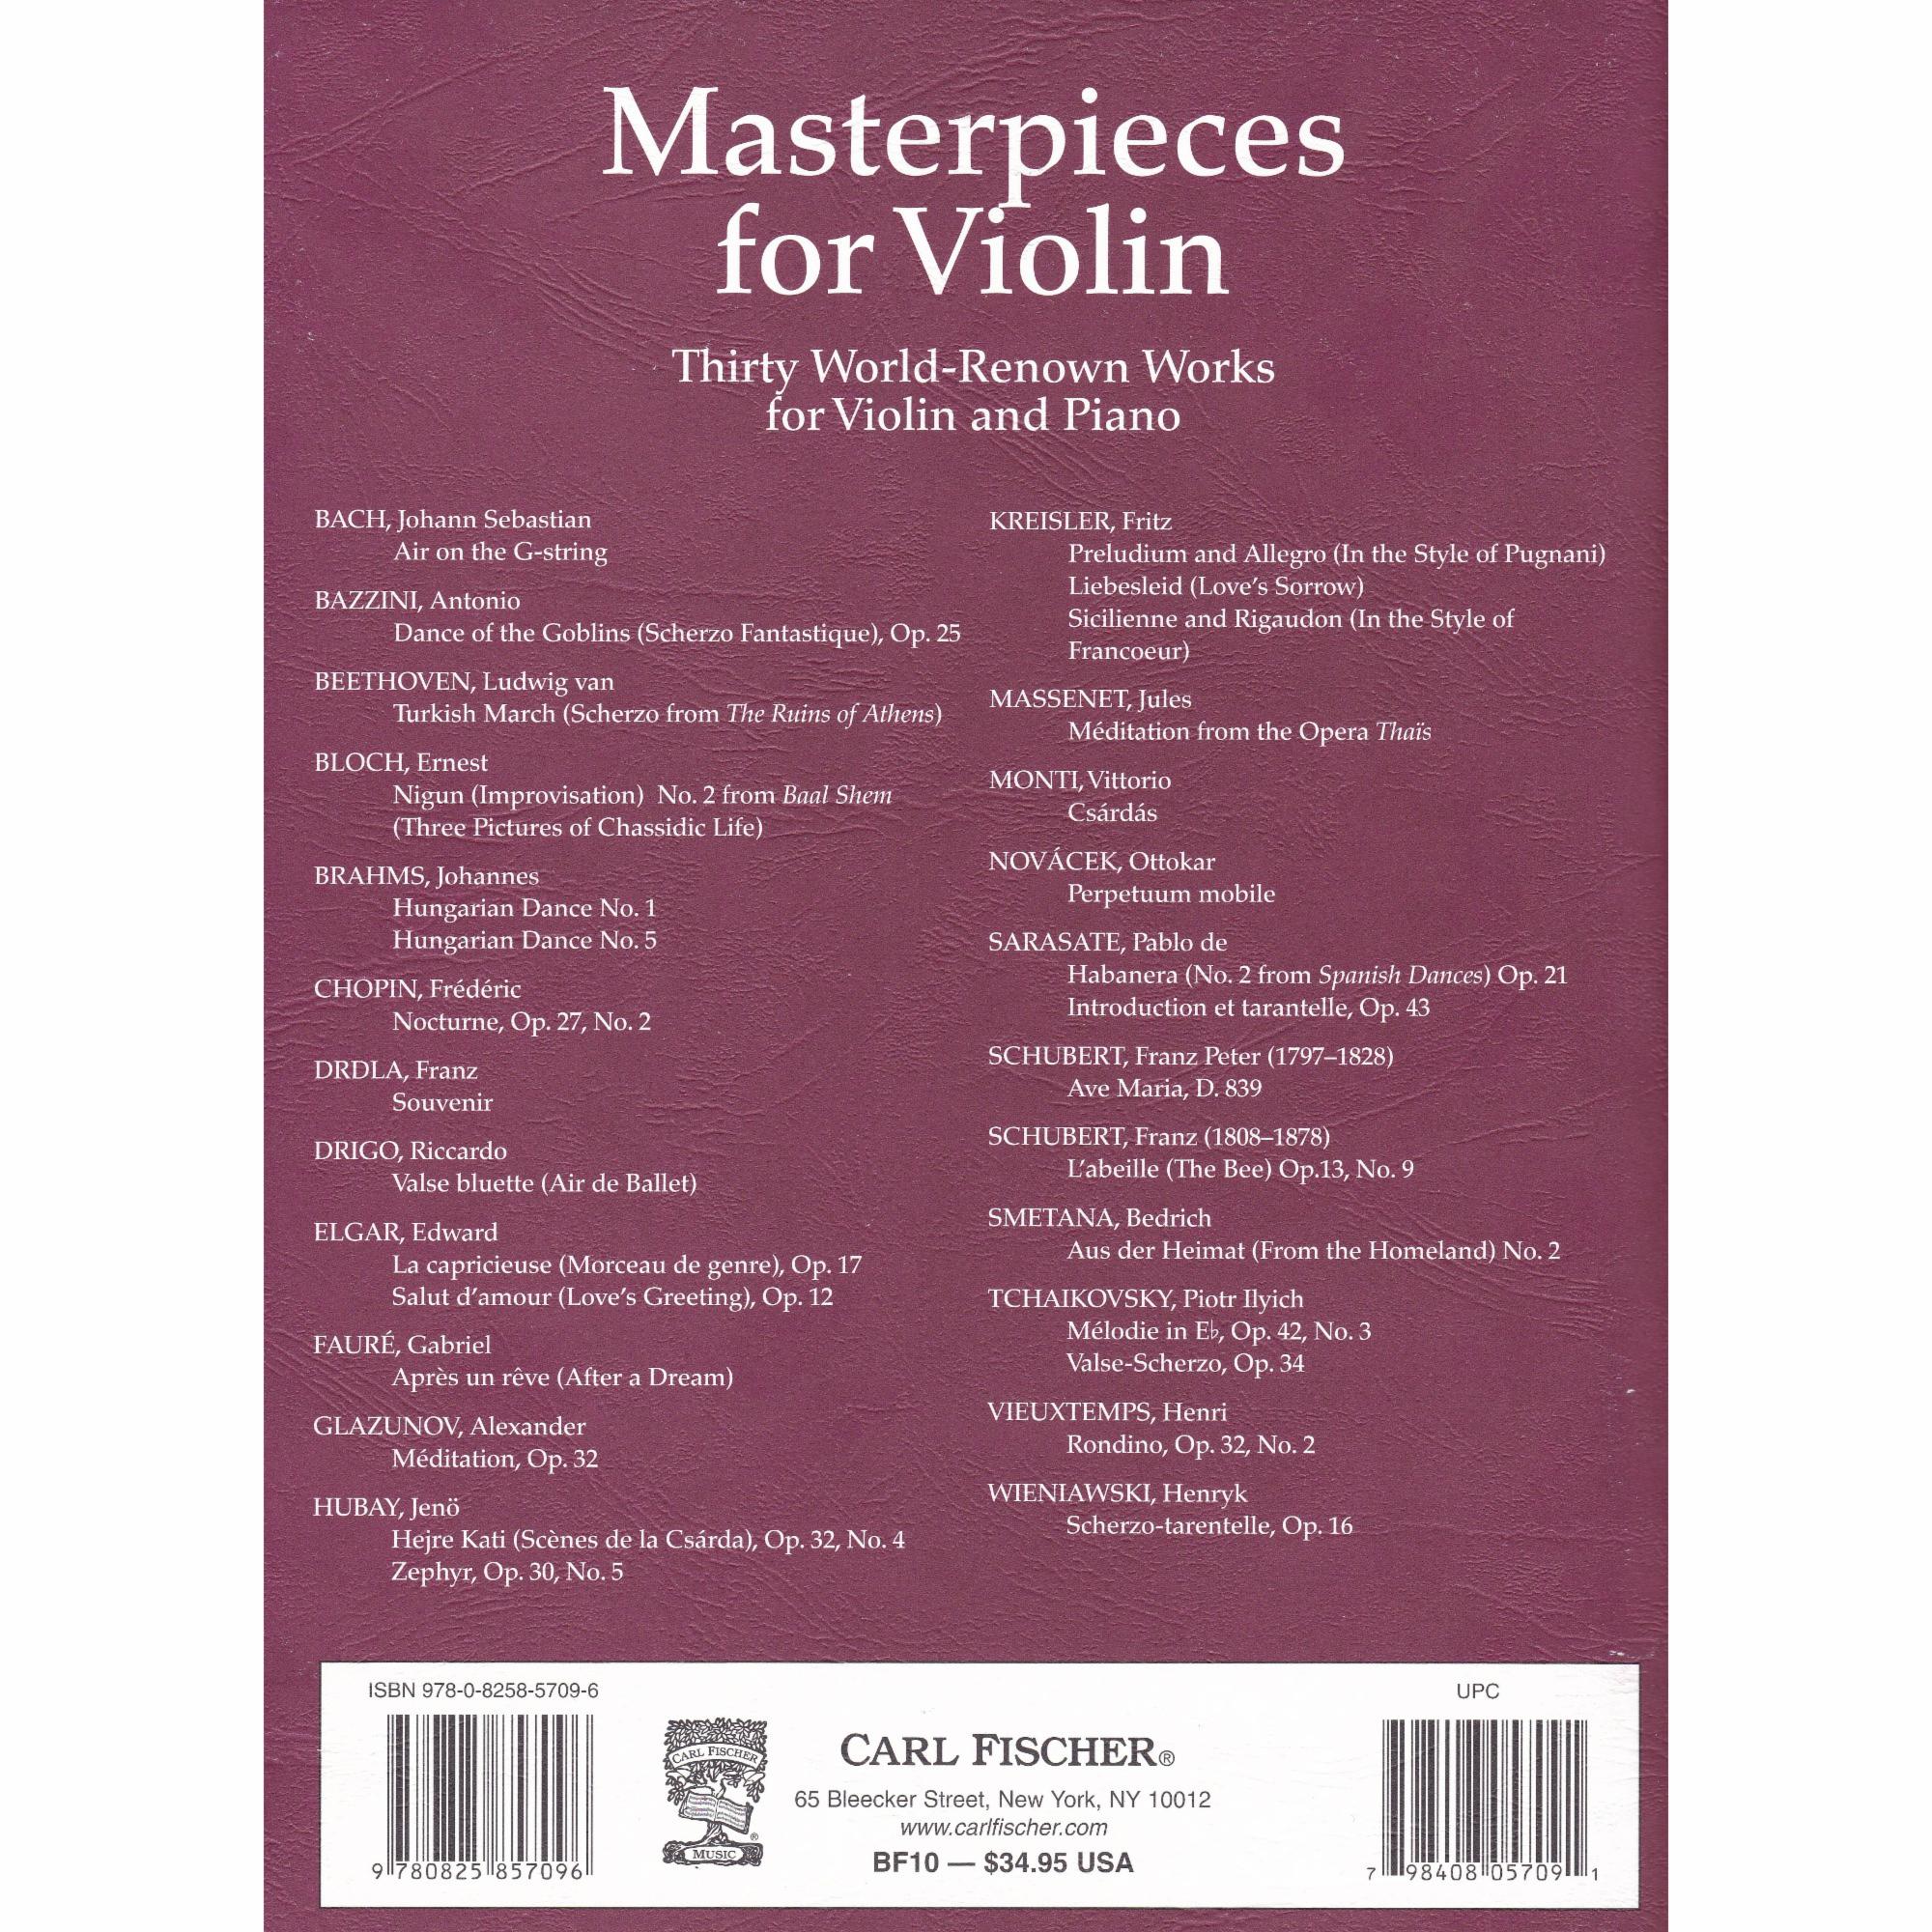 Masterpieces for Violin and Piano